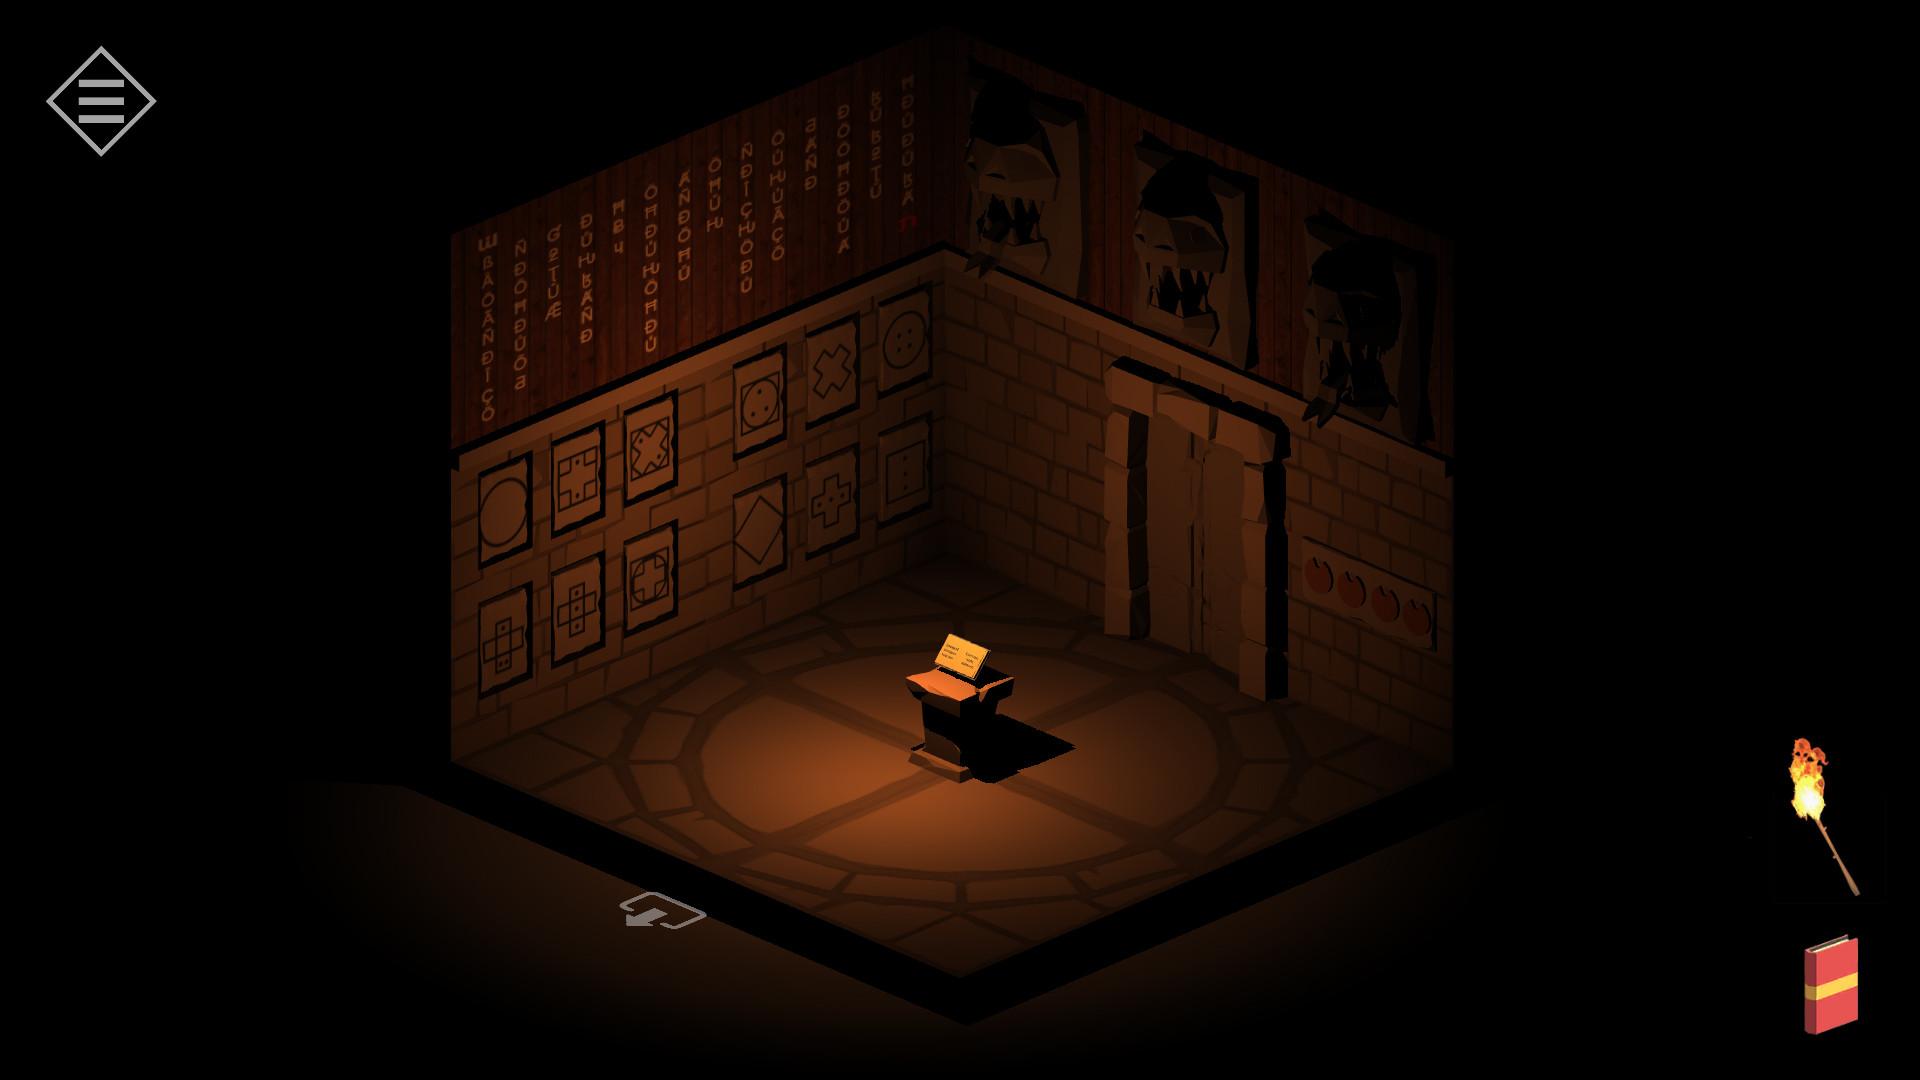 Tiny Room Stories: Town Mystery